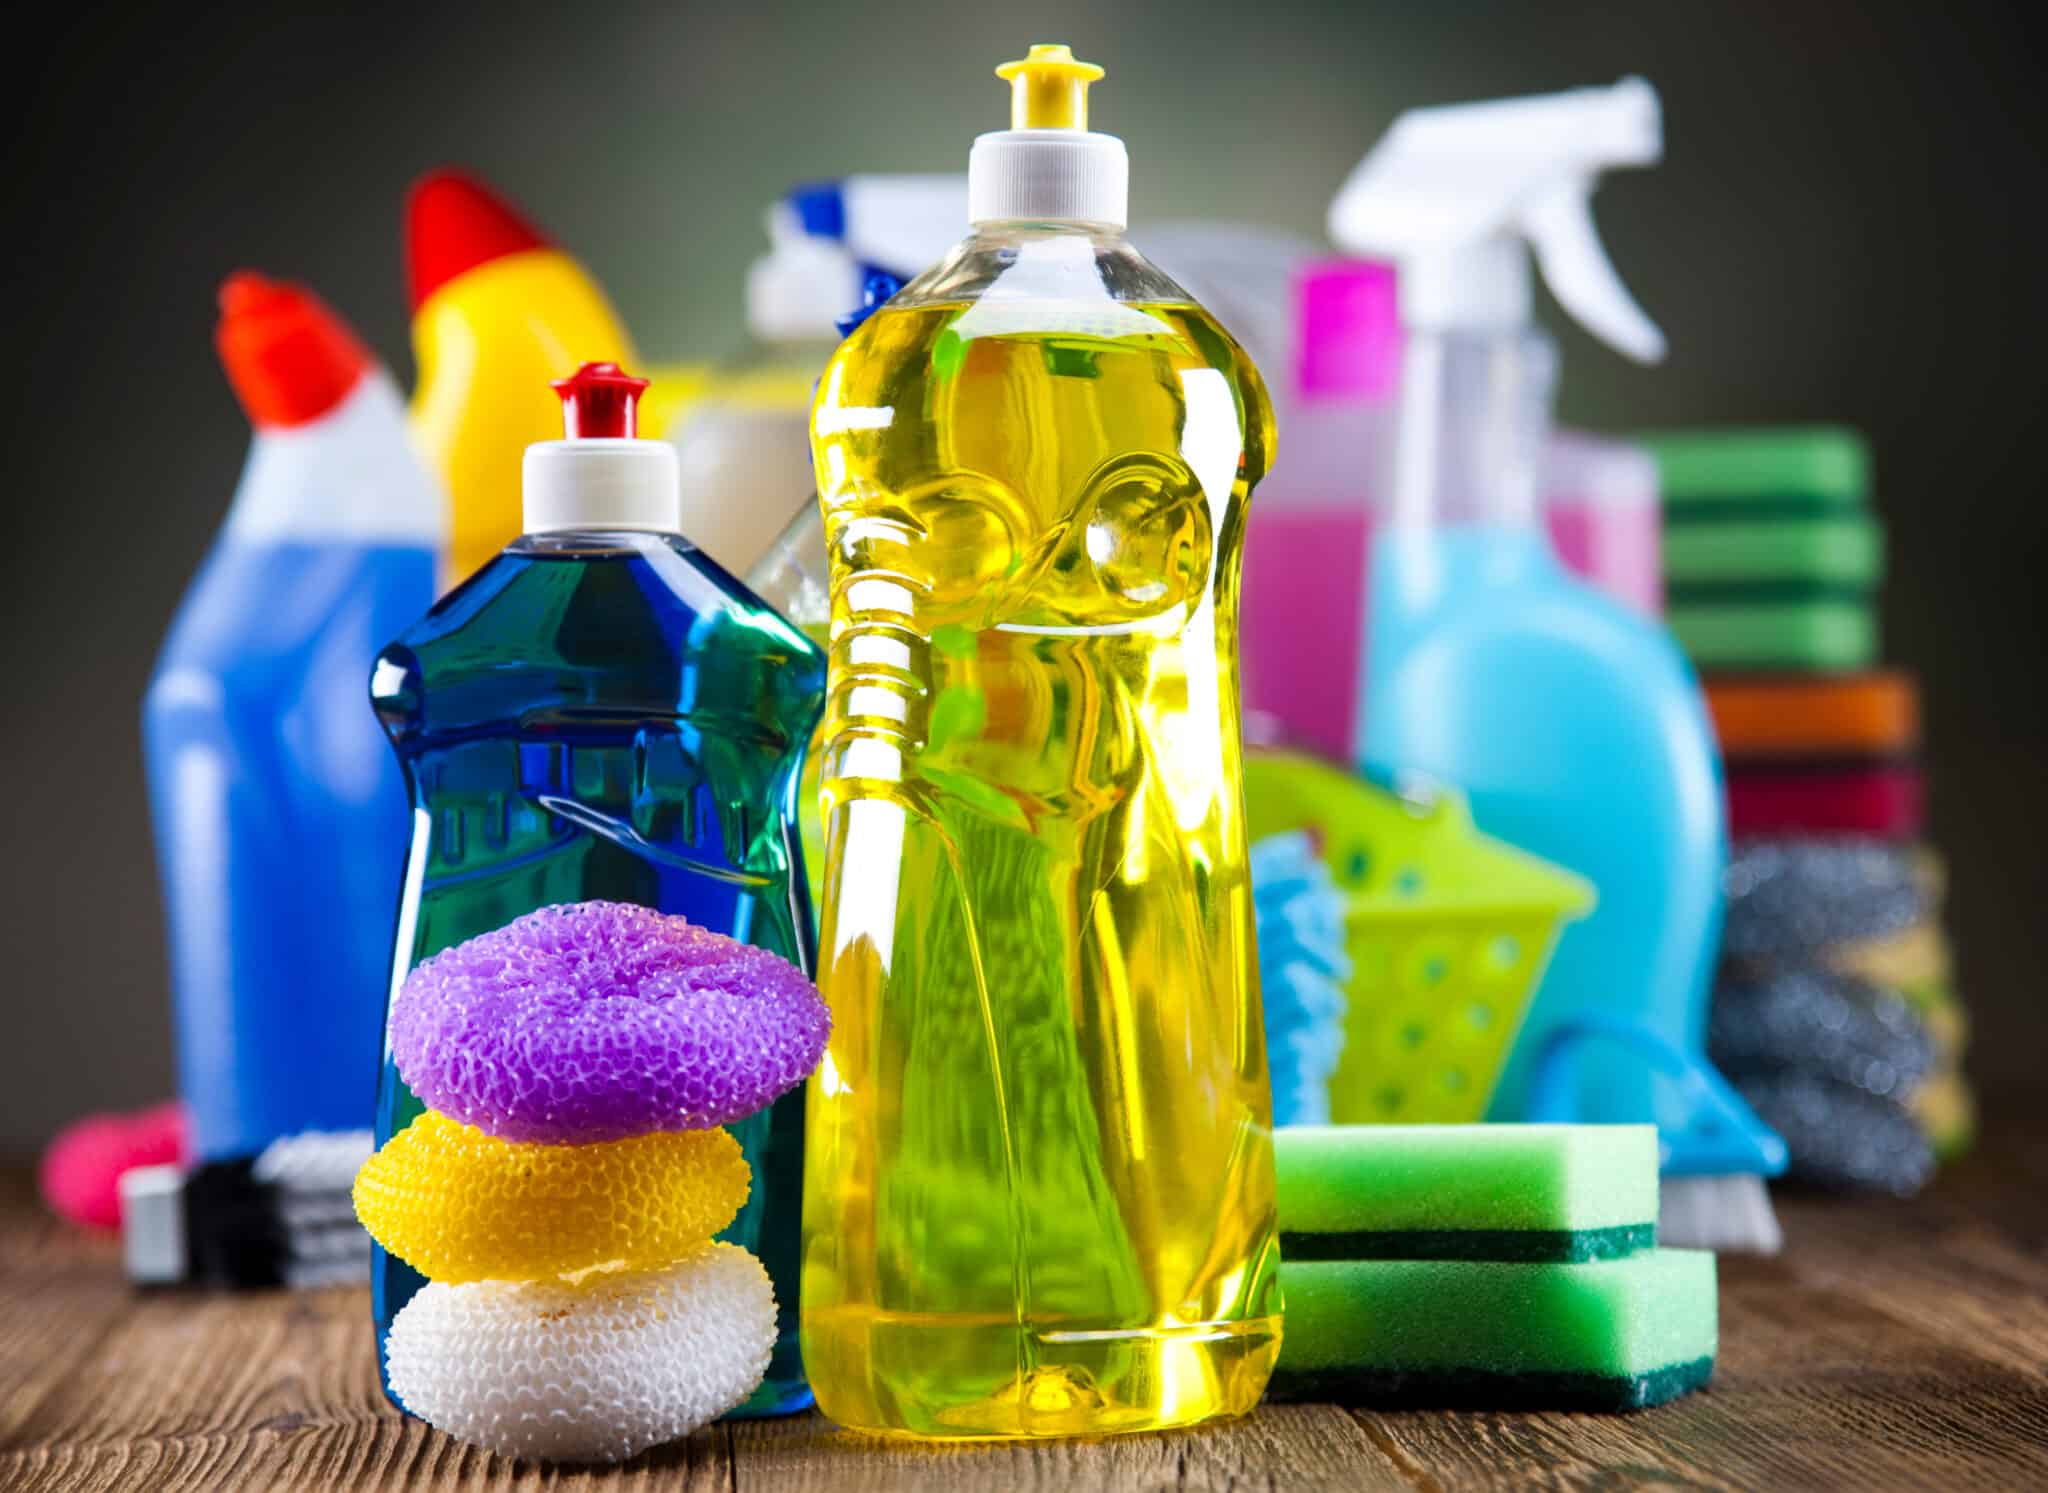 How to Choose Cleaning Products Safe Enough to Use Around Your